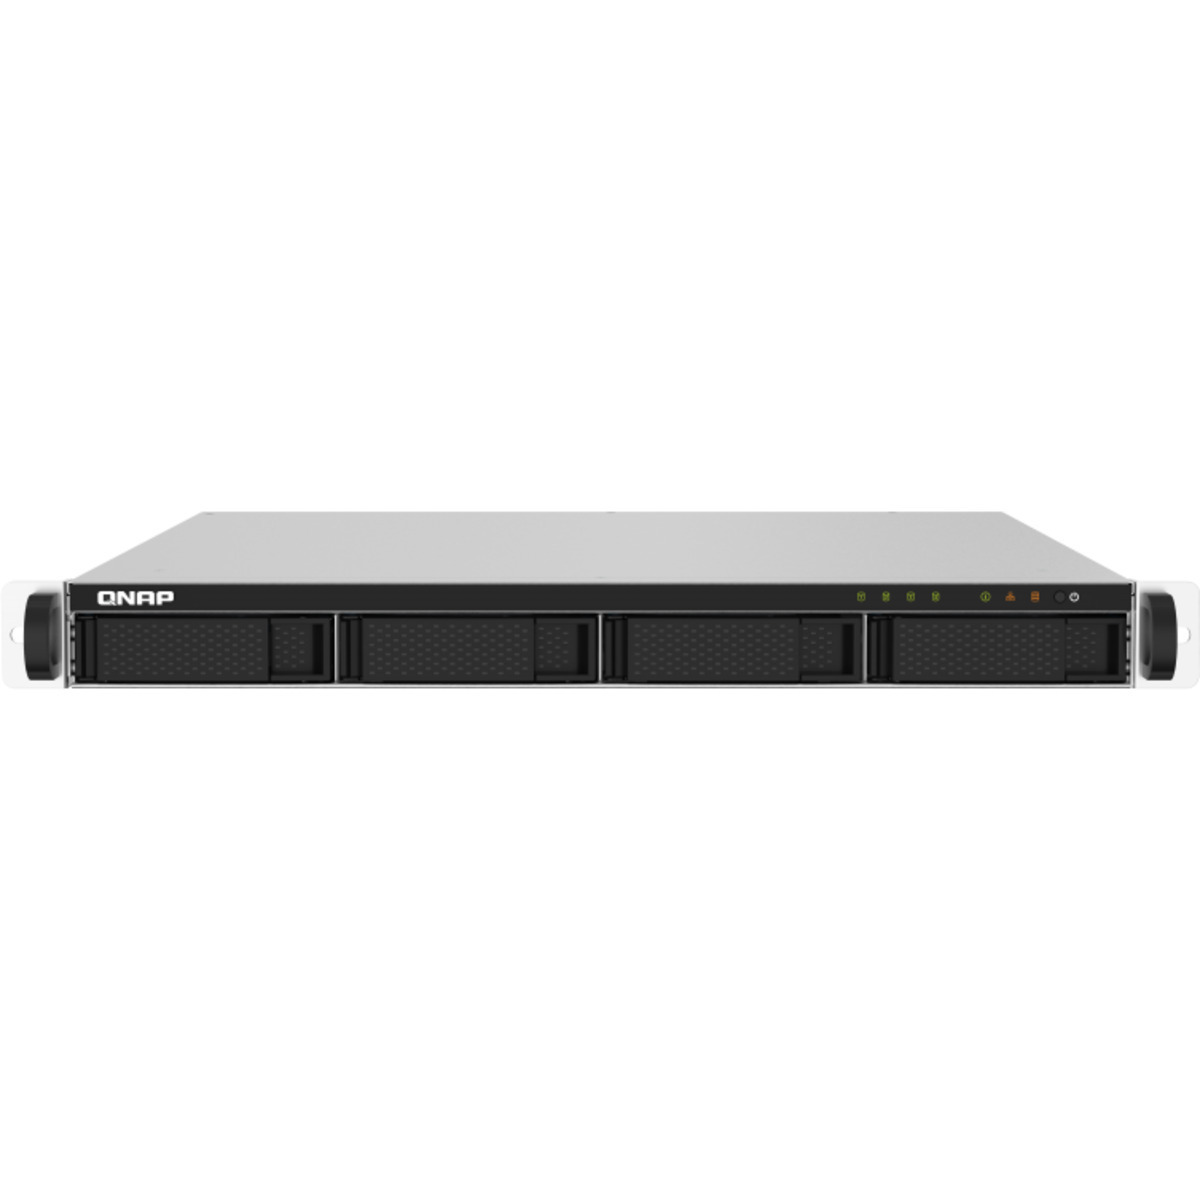 QNAP TS-432PXU 20tb 4-Bay RackMount Personal / Basic Home / Small Office NAS - Network Attached Storage Device 2x10tb Seagate IronWolf Pro ST10000NT001 3.5 7200rpm SATA 6Gb/s HDD NAS Class Drives Installed - Burn-In Tested - ON SALE - FREE RAM UPGRADE TS-432PXU